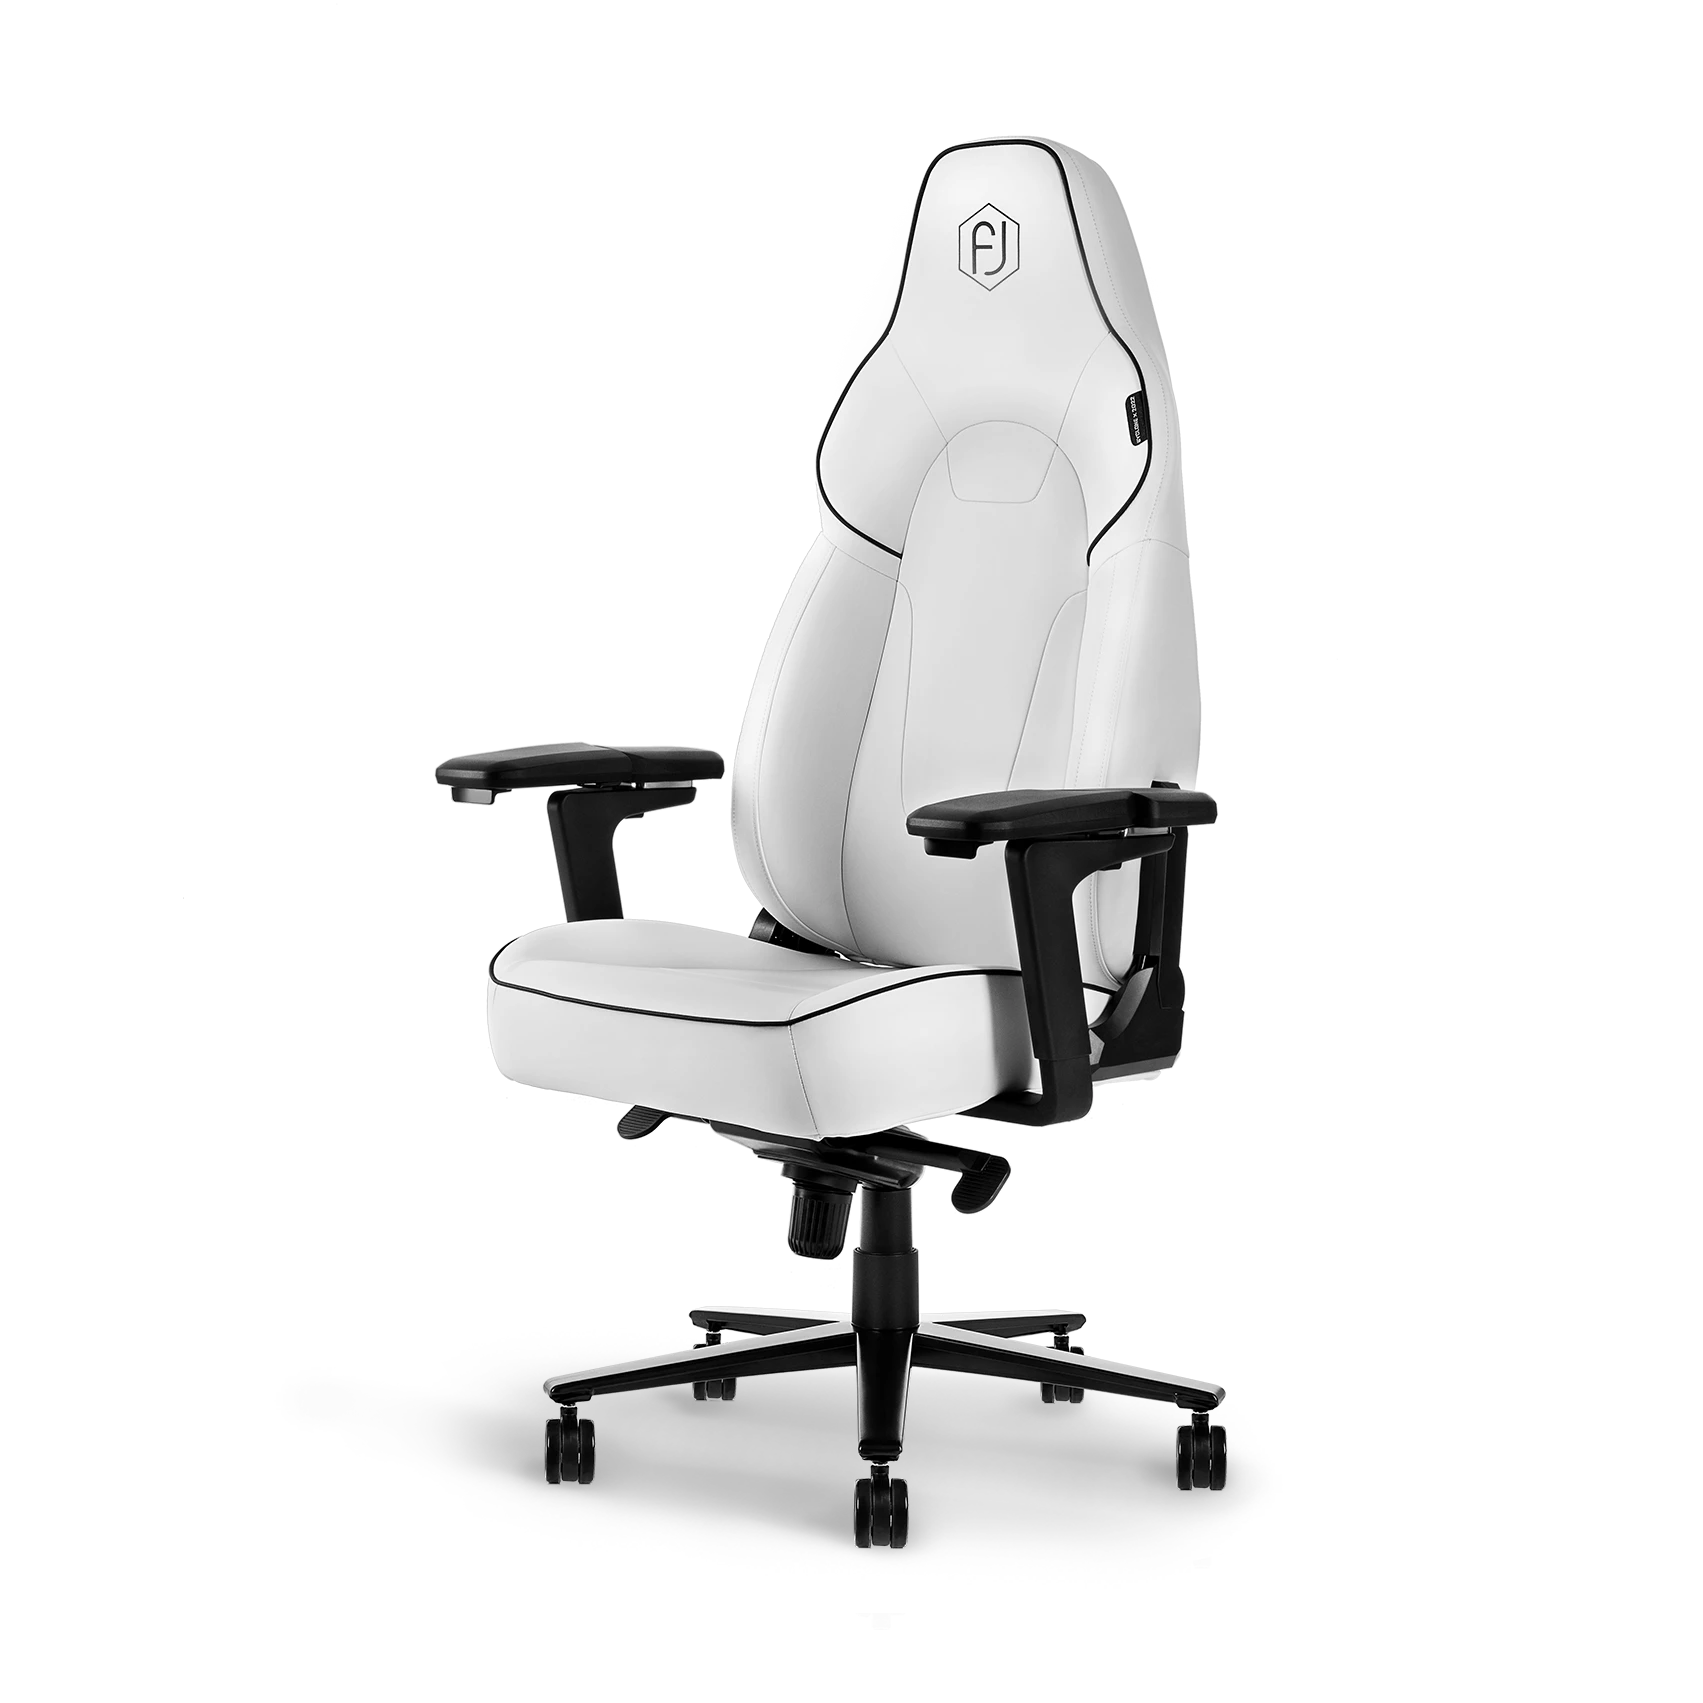 White ergonomic gaming chair with adjustable armrests and black accents, front view.